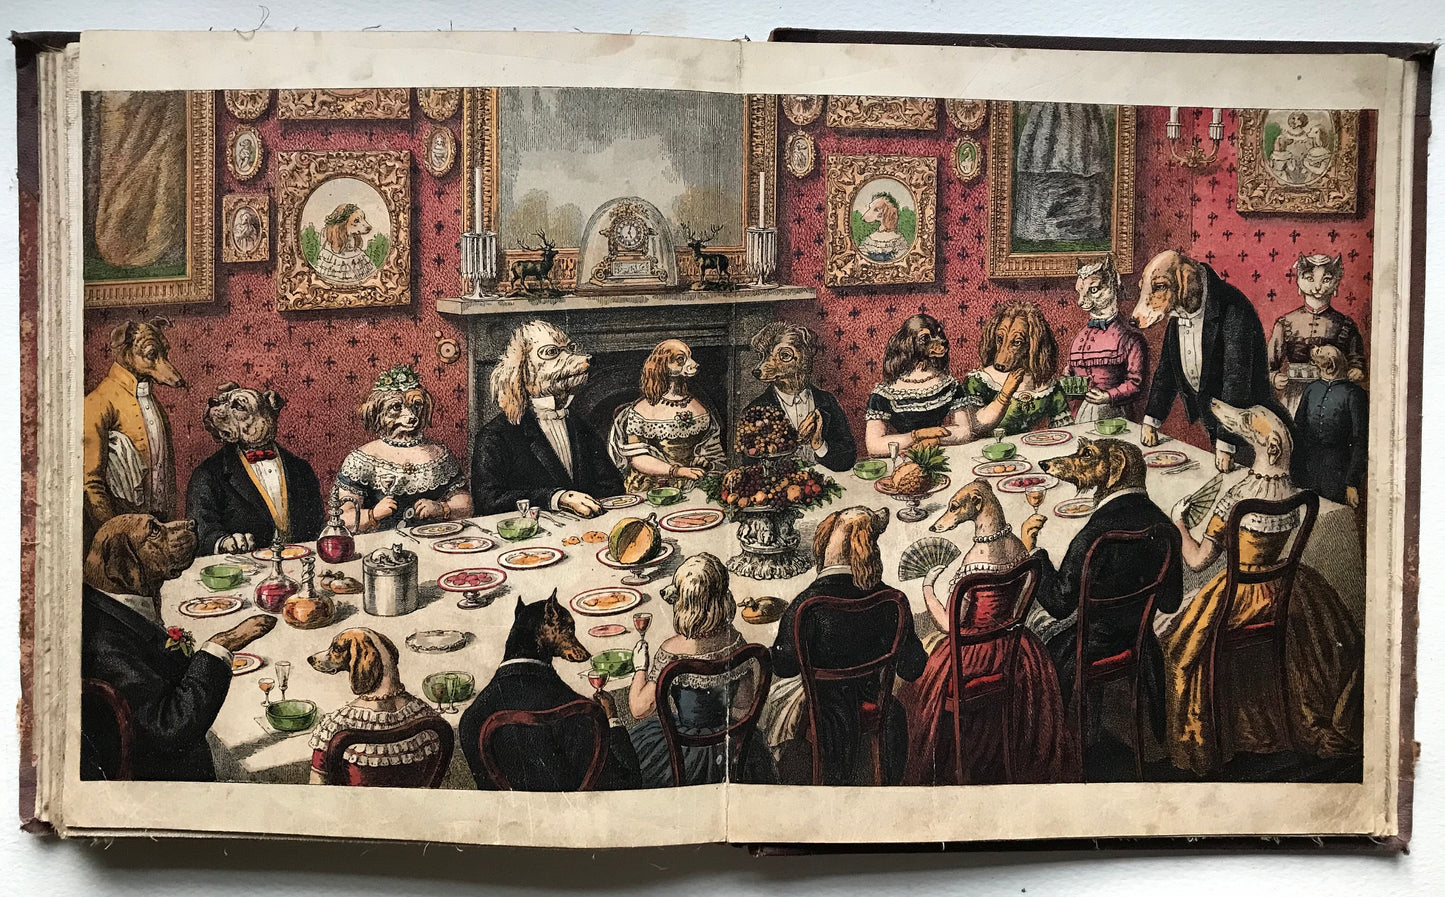 The Dogs’ Dinner Party, The White Cat, The Little Dog Trusty and My Mother. Published by George Routledge in 1870. 27 x 23 cms.